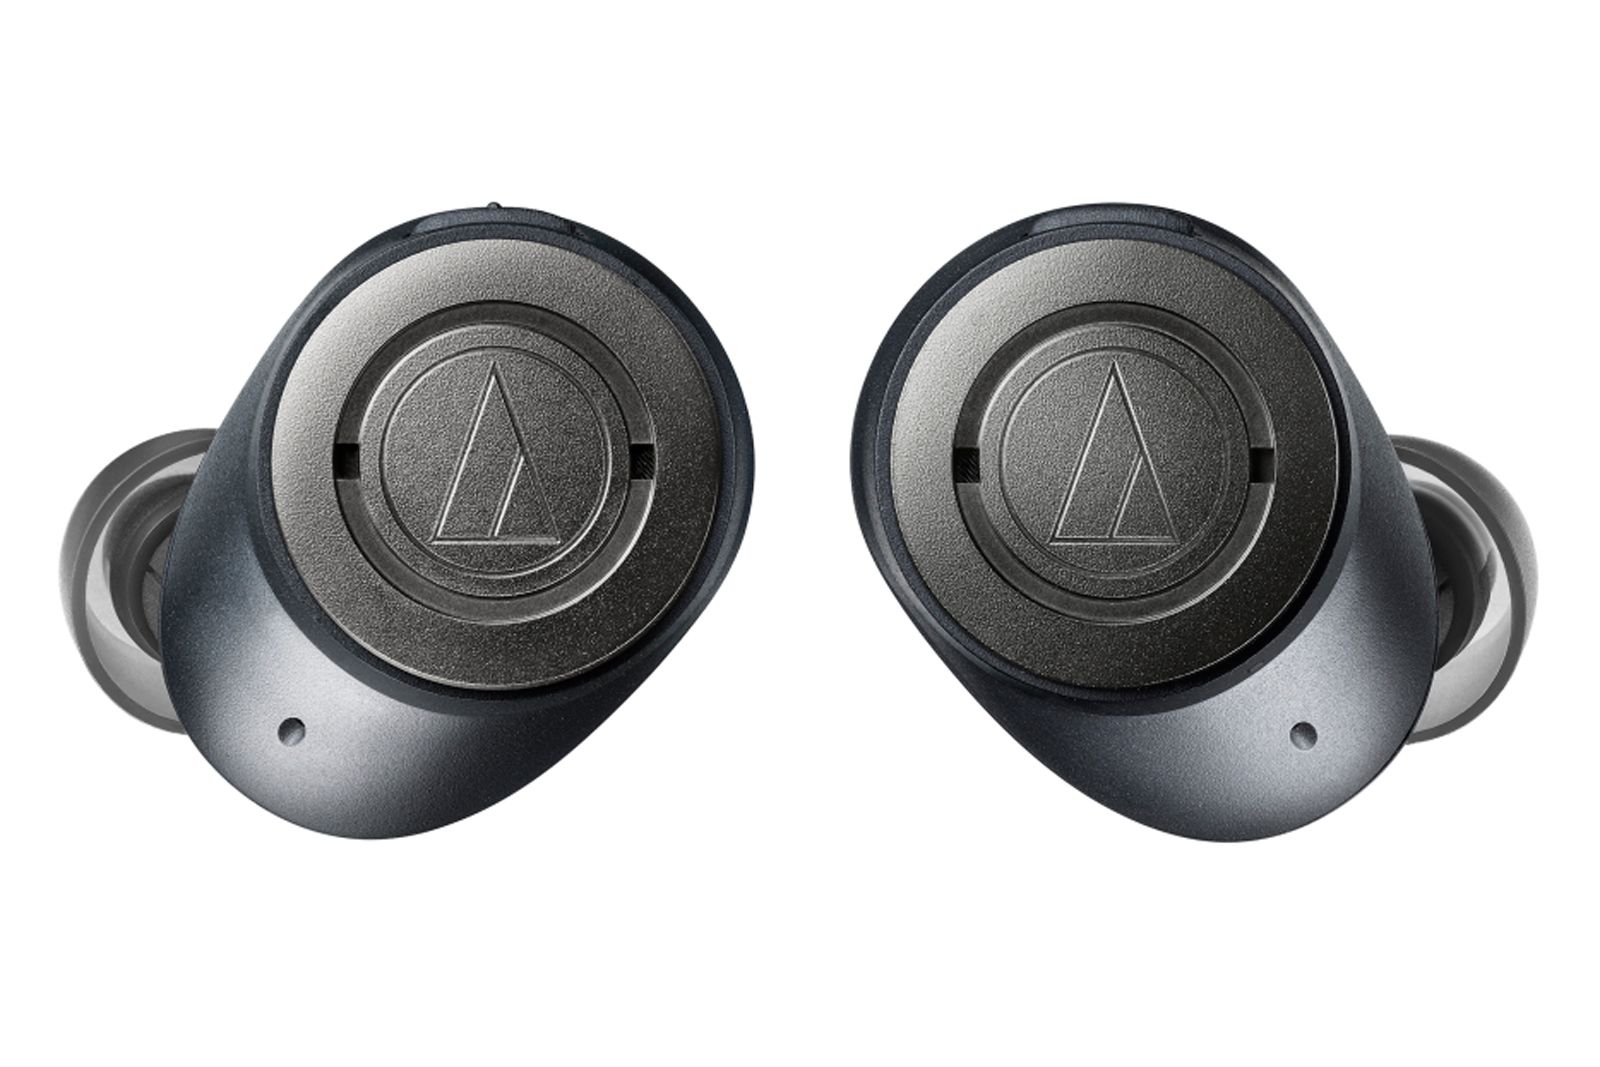 Audio-Technica intros ATH-ANC300TW noise-cancelling wireless earbuds image 2